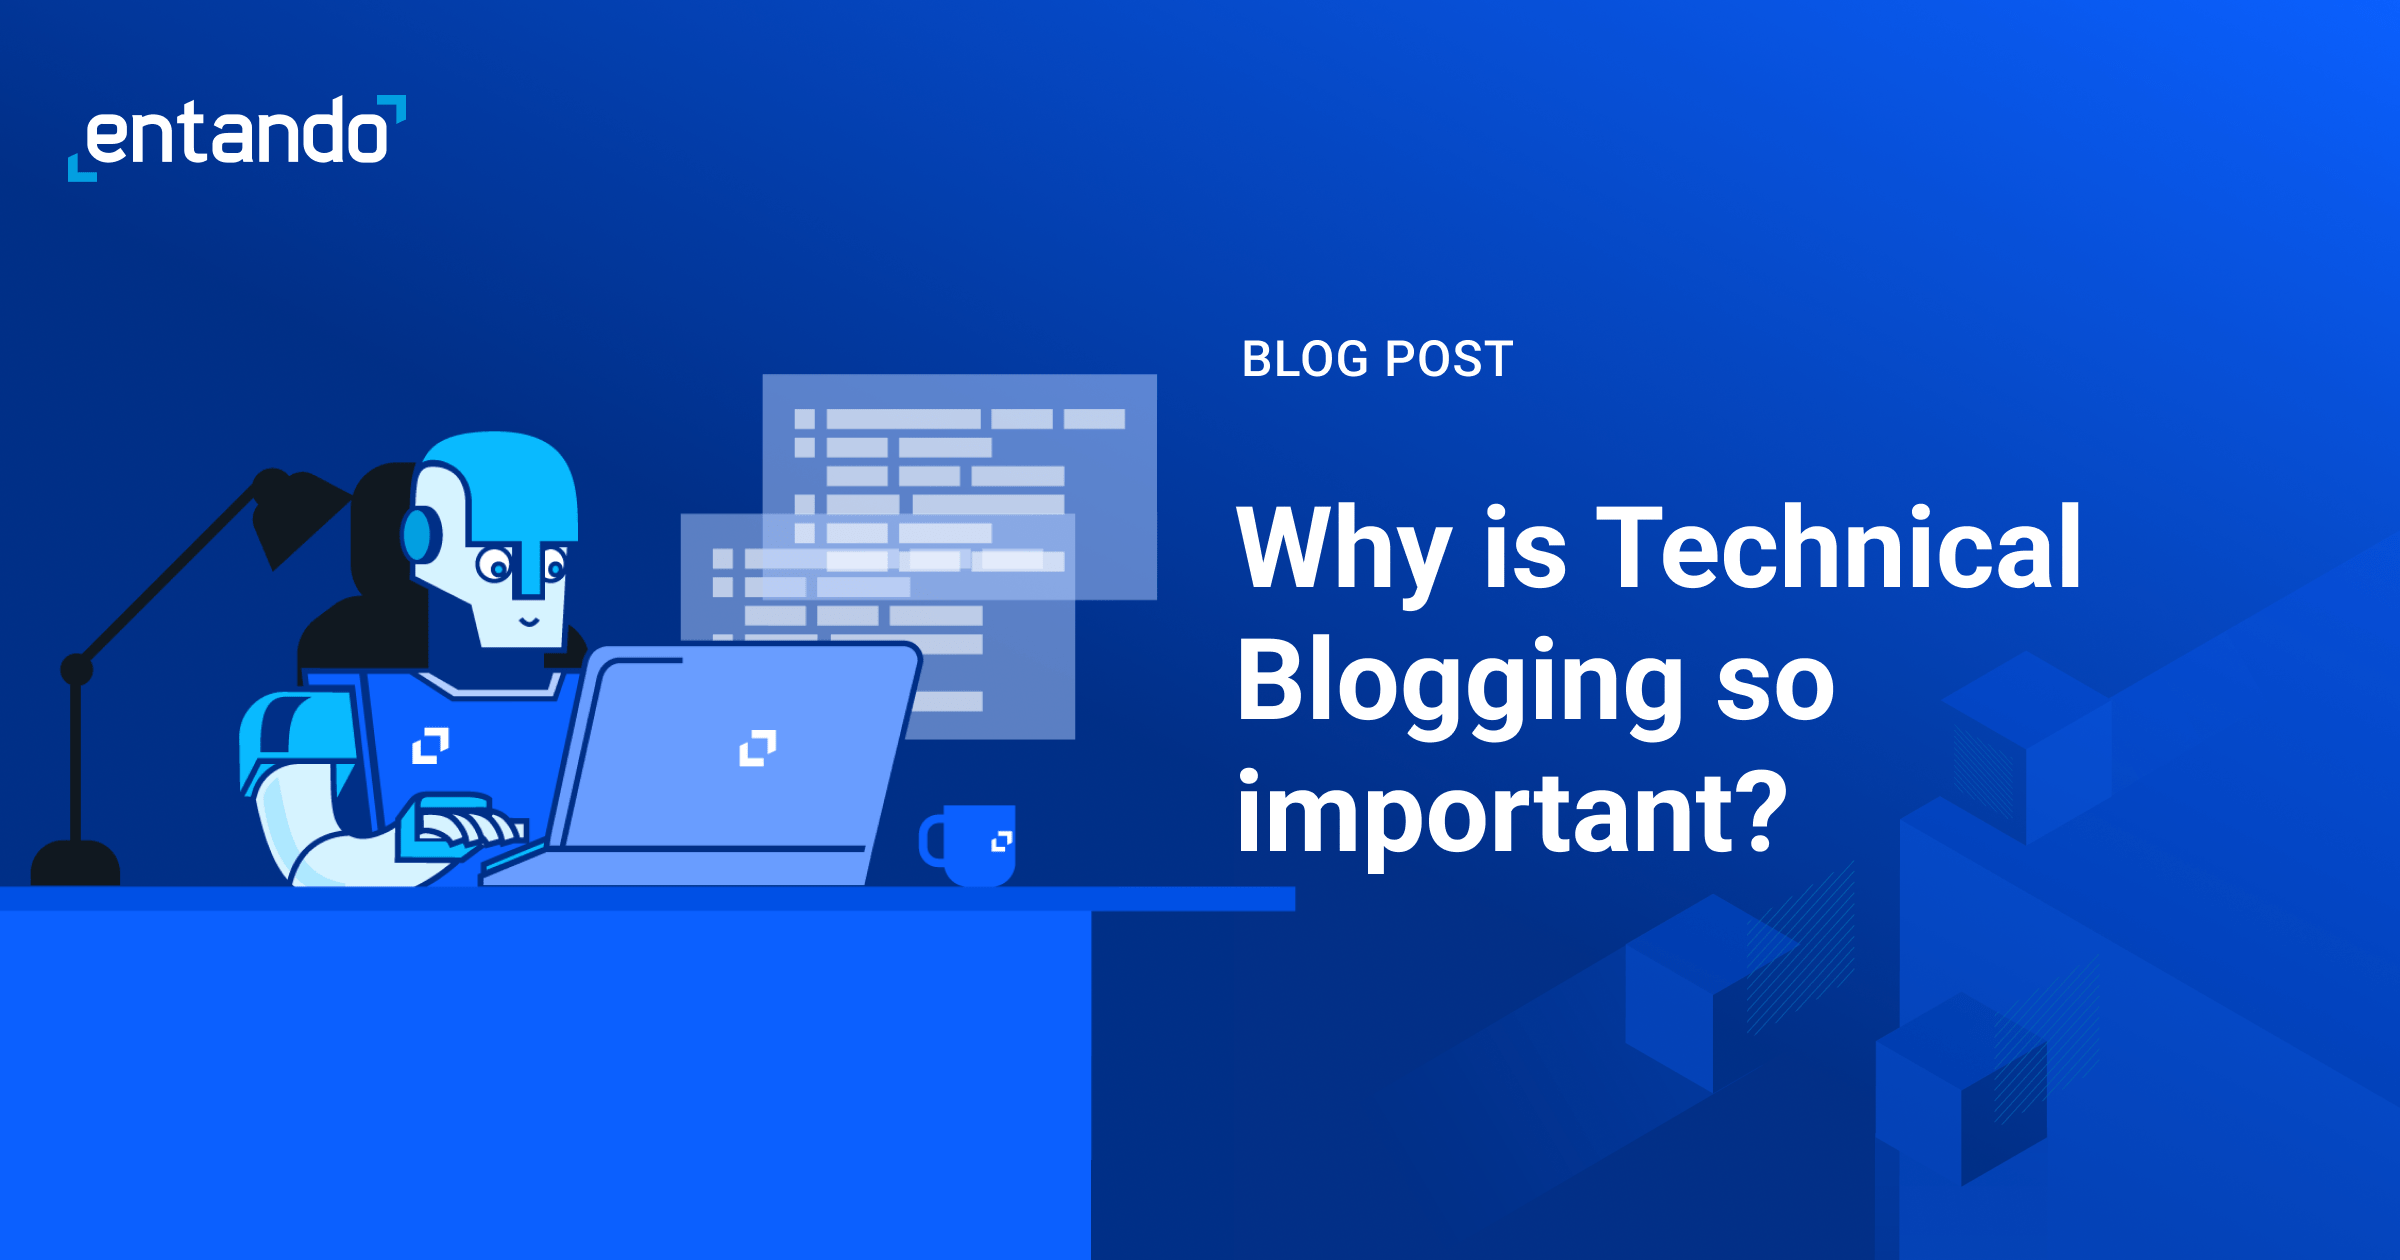 ENTANDO_Why is Technical Blogging so important_-min.png